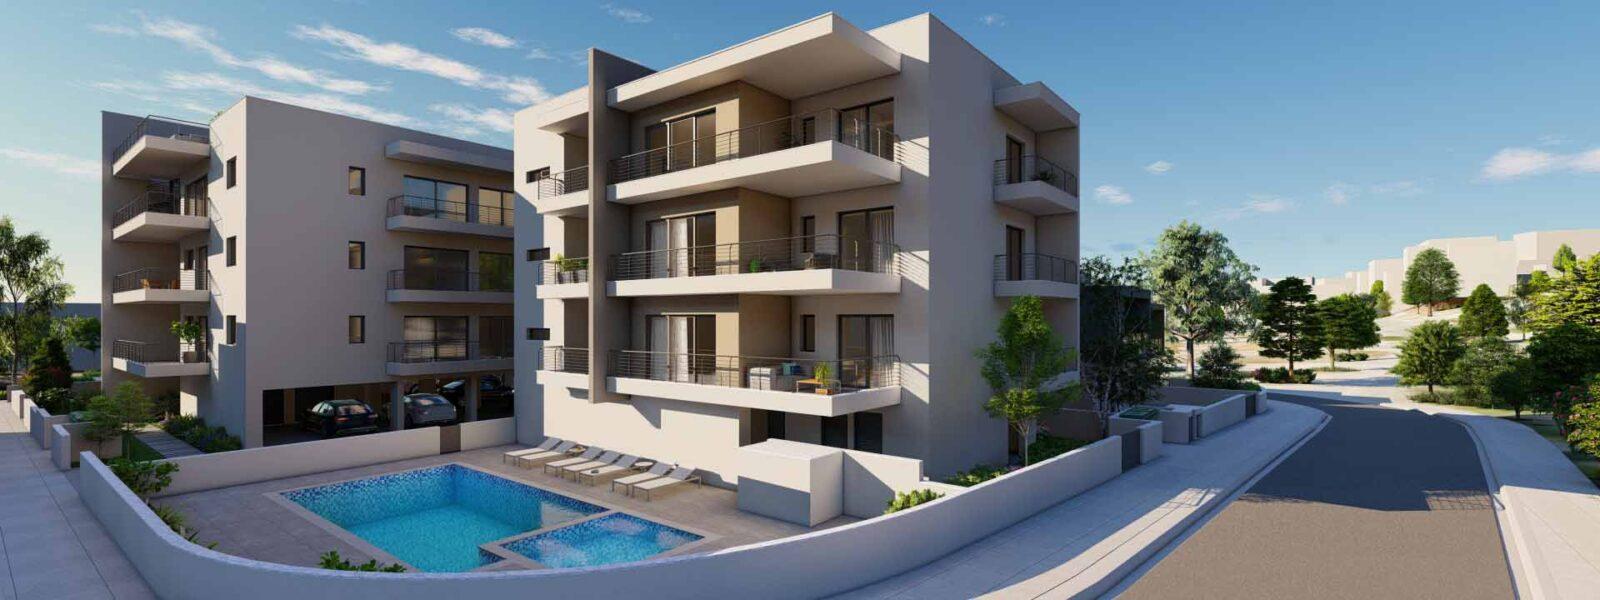 APARTMENTS FOR SALE IN PAPHOS, CYPRUS